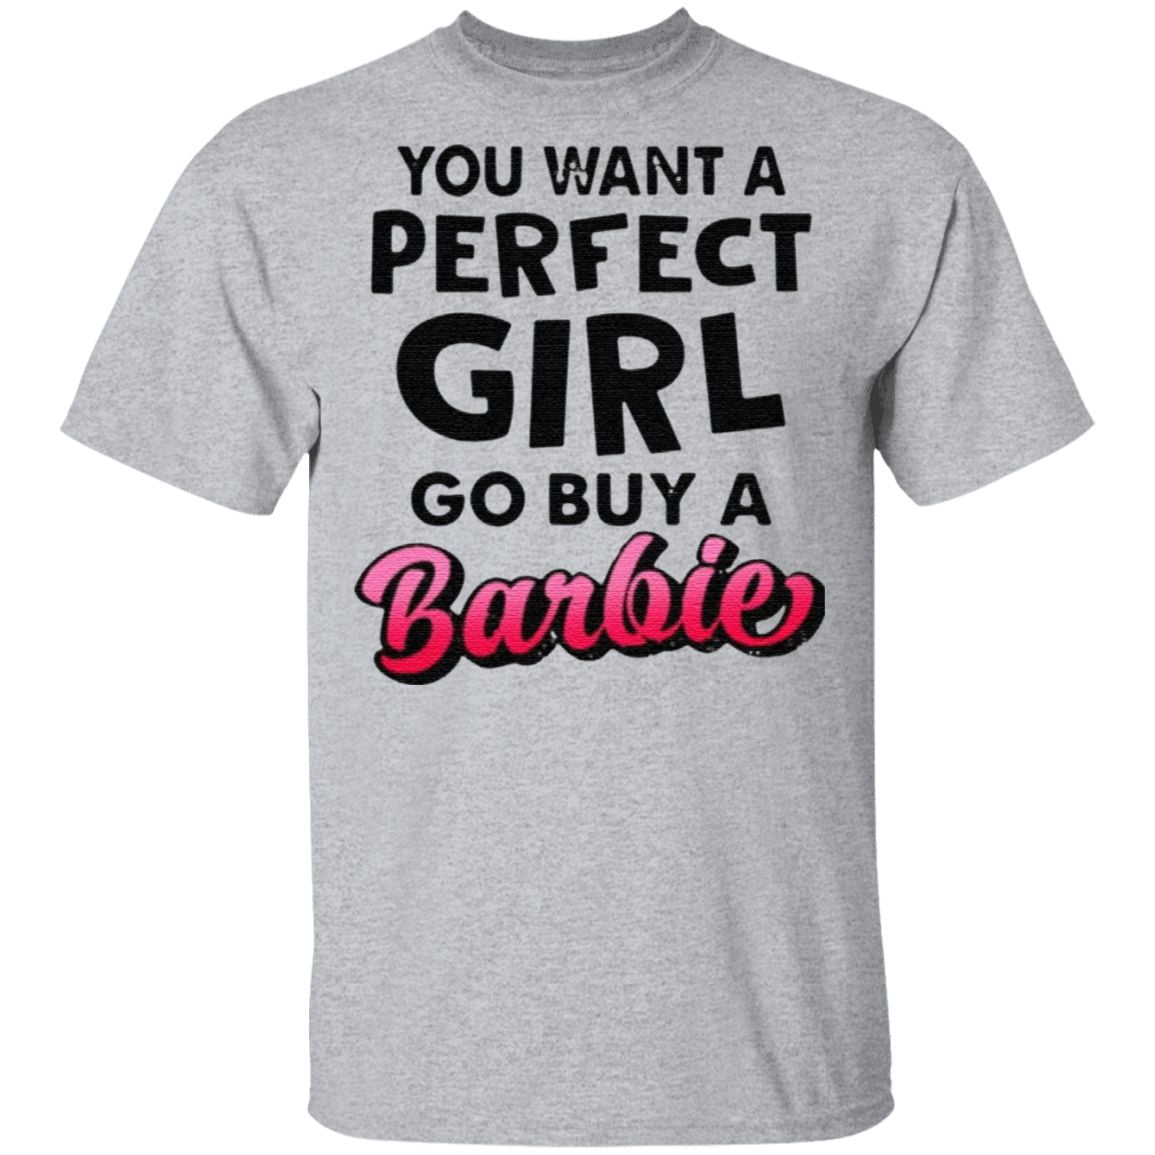 You want a perfect girl go buy a barbie t shirt